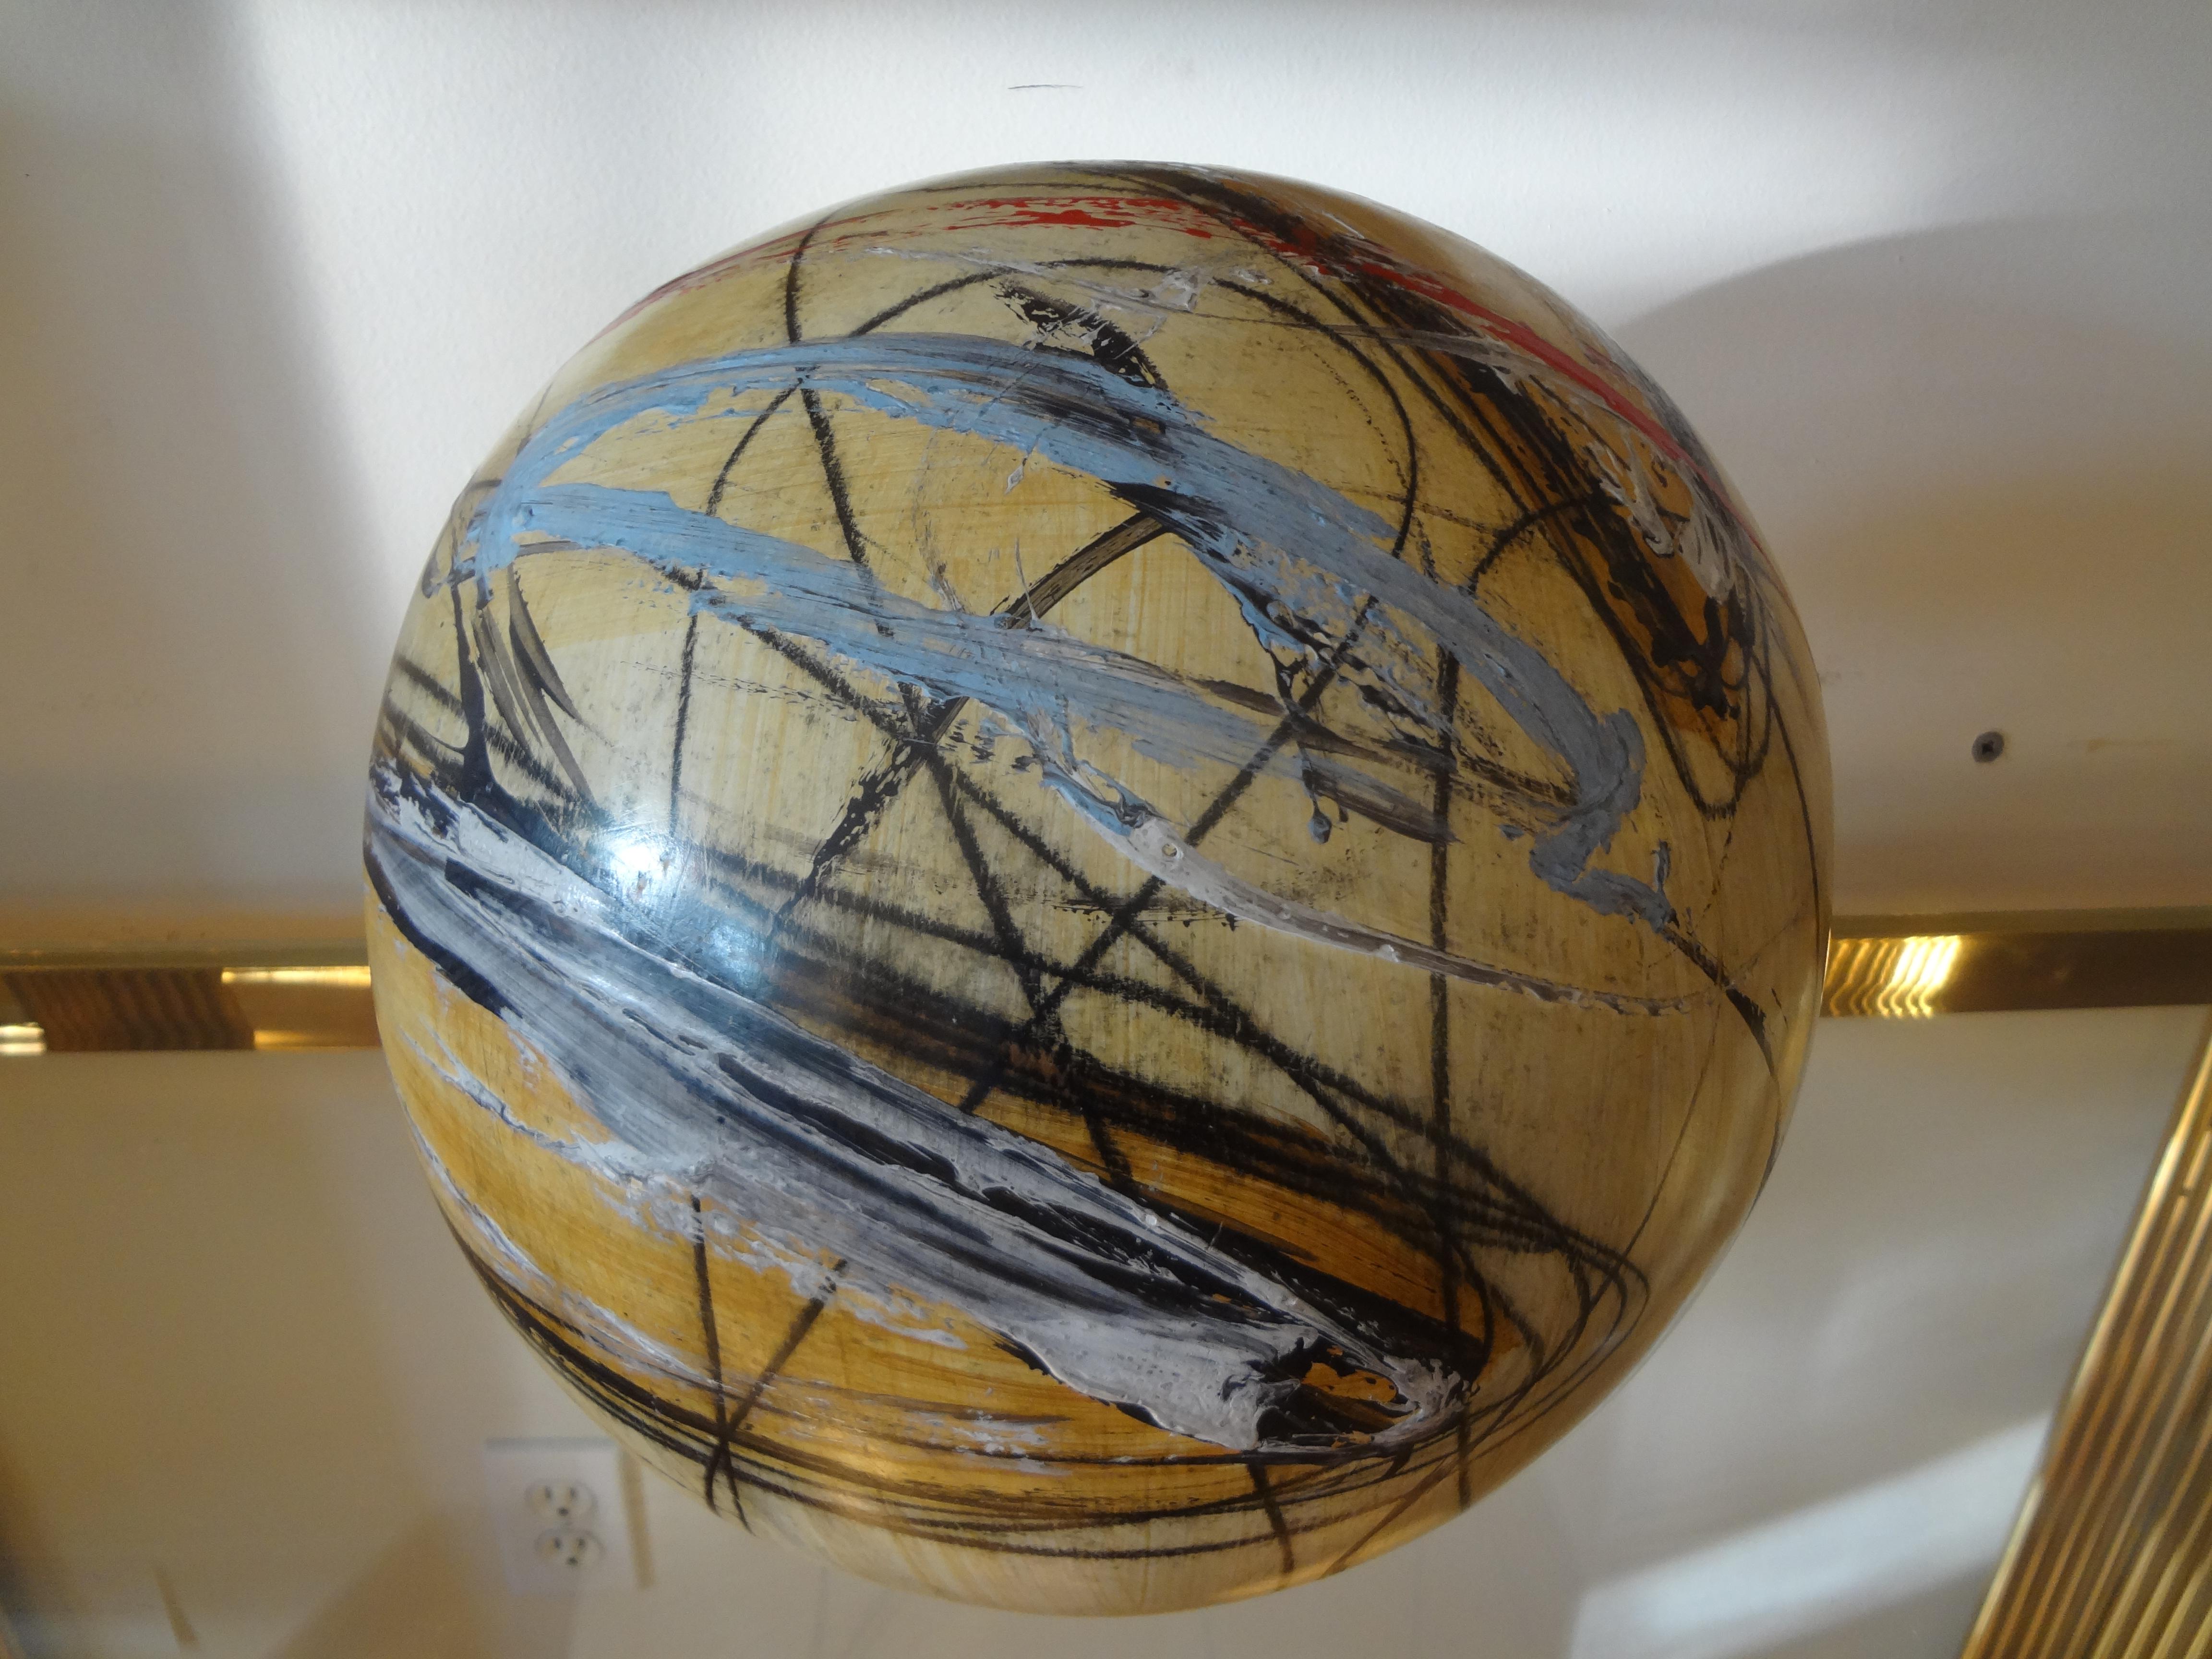 Interesting Mid-Century Modern hand decorated multicolored abstract sphere sculpture by Yuri Zatarain. This colorful vintage ceramic sphere sculpture is freestanding and large in size. Dimensions: 12